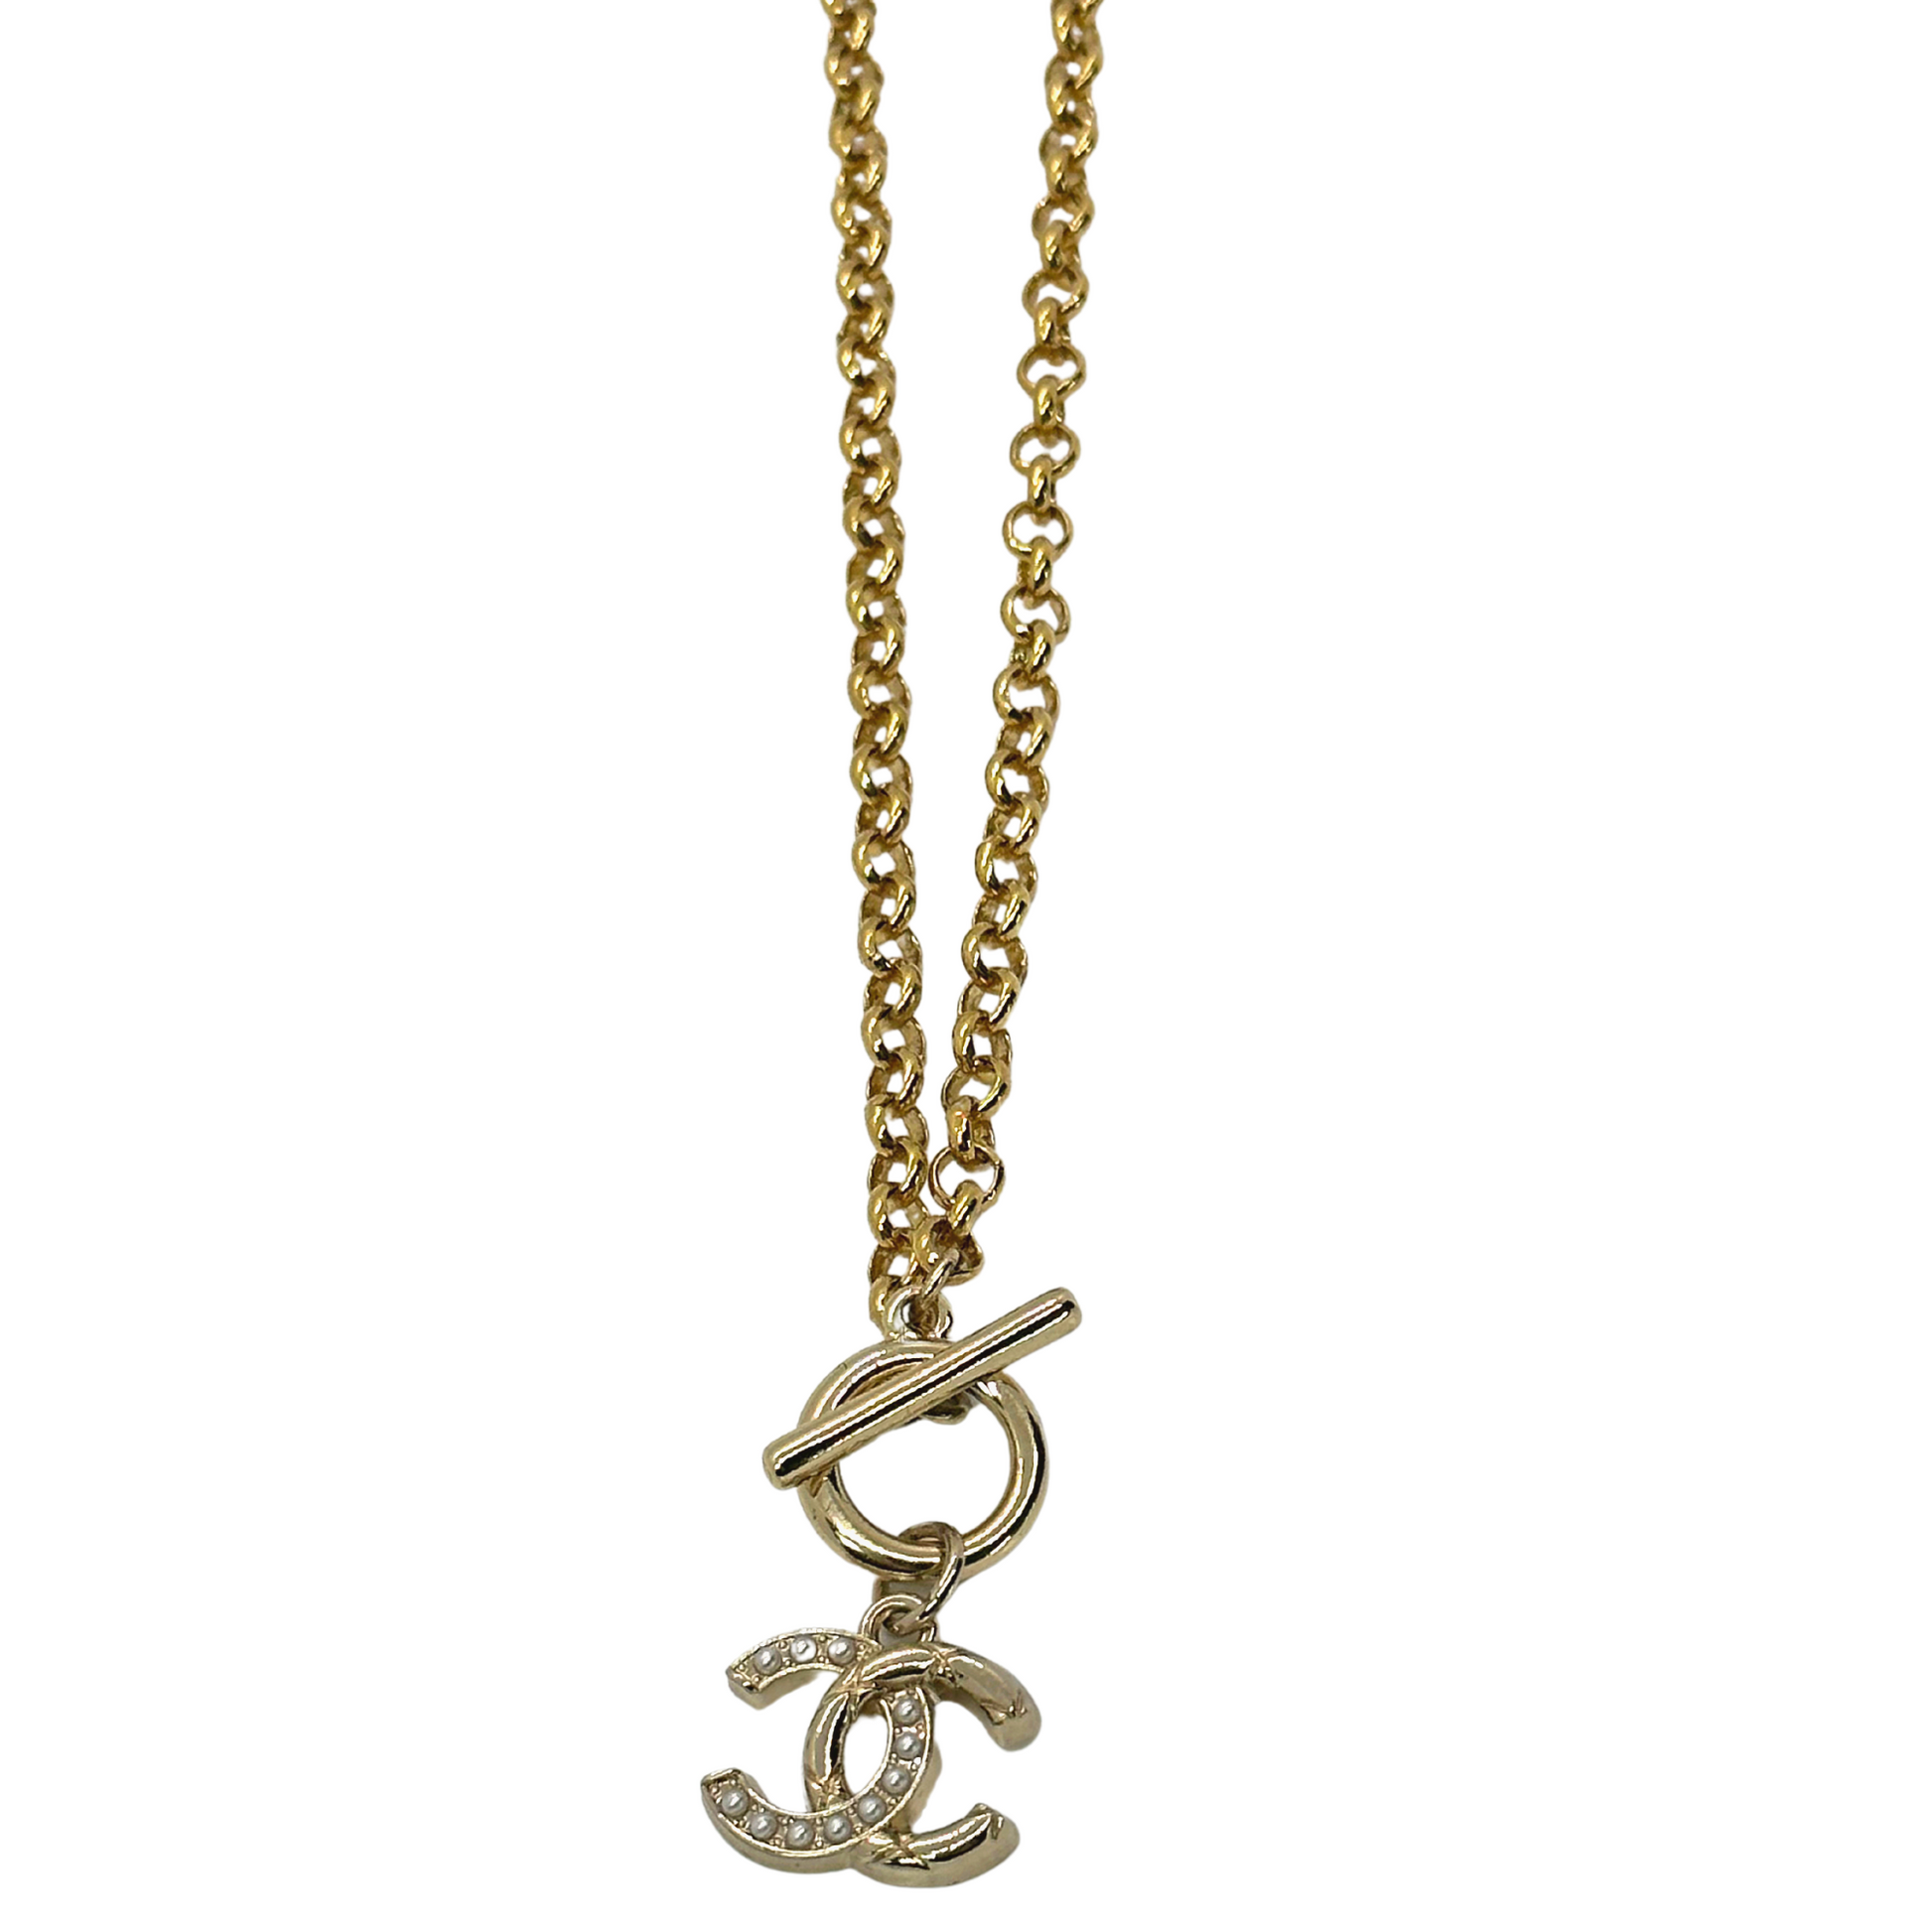 Chanel Pearl Pendant Necklace